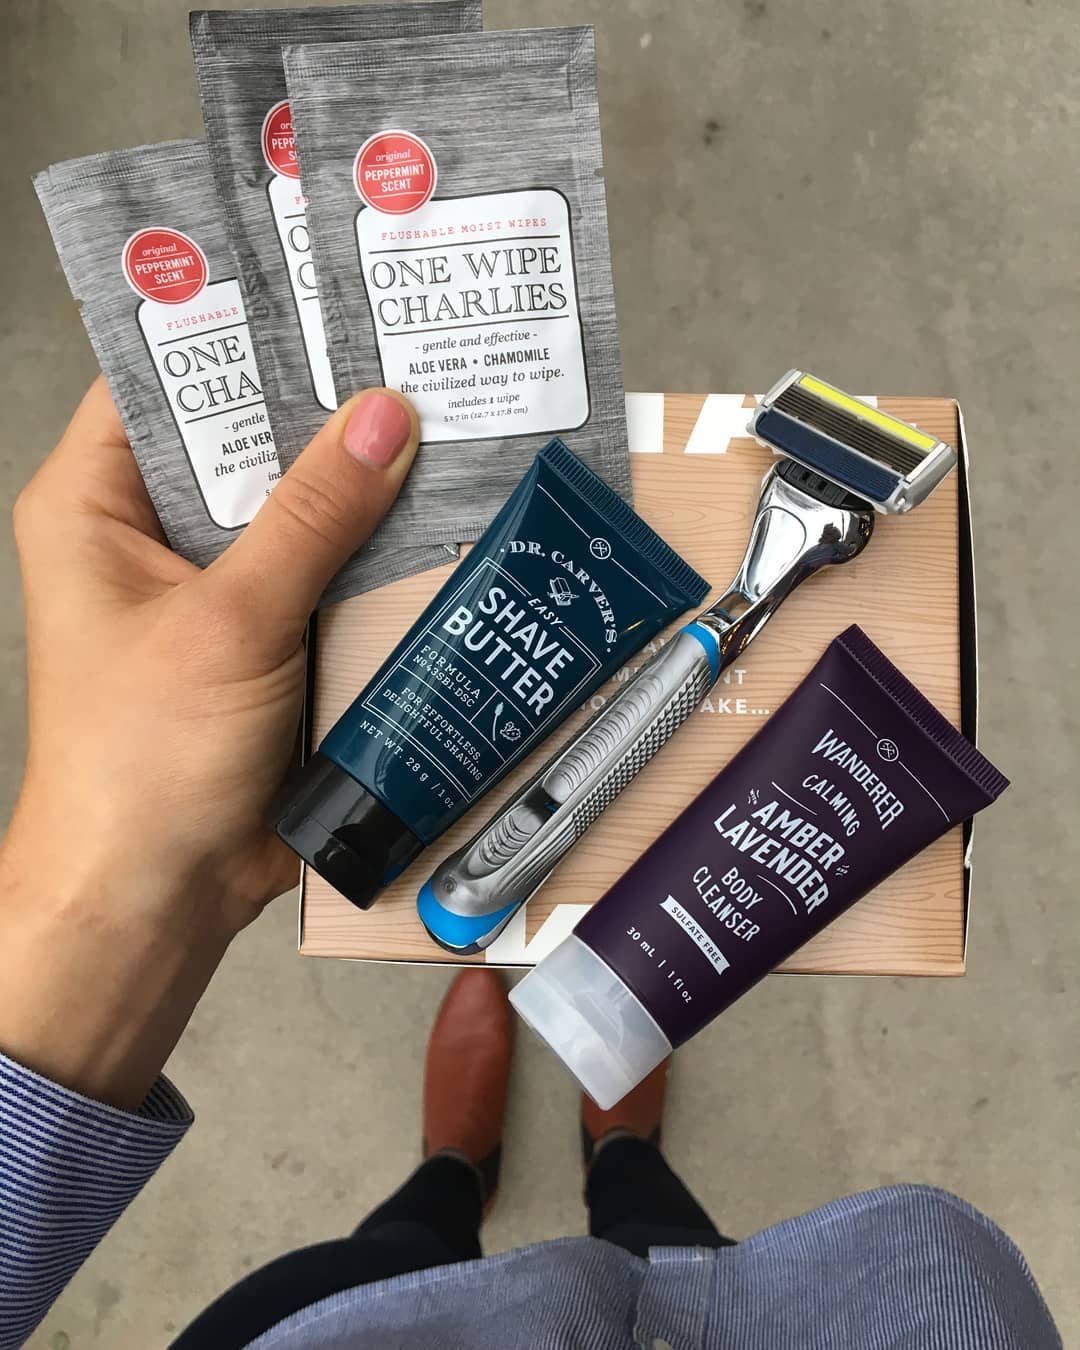 dollar shave club kit deal – Dollar Shave Club Starter Kit wipes, creams, and razors